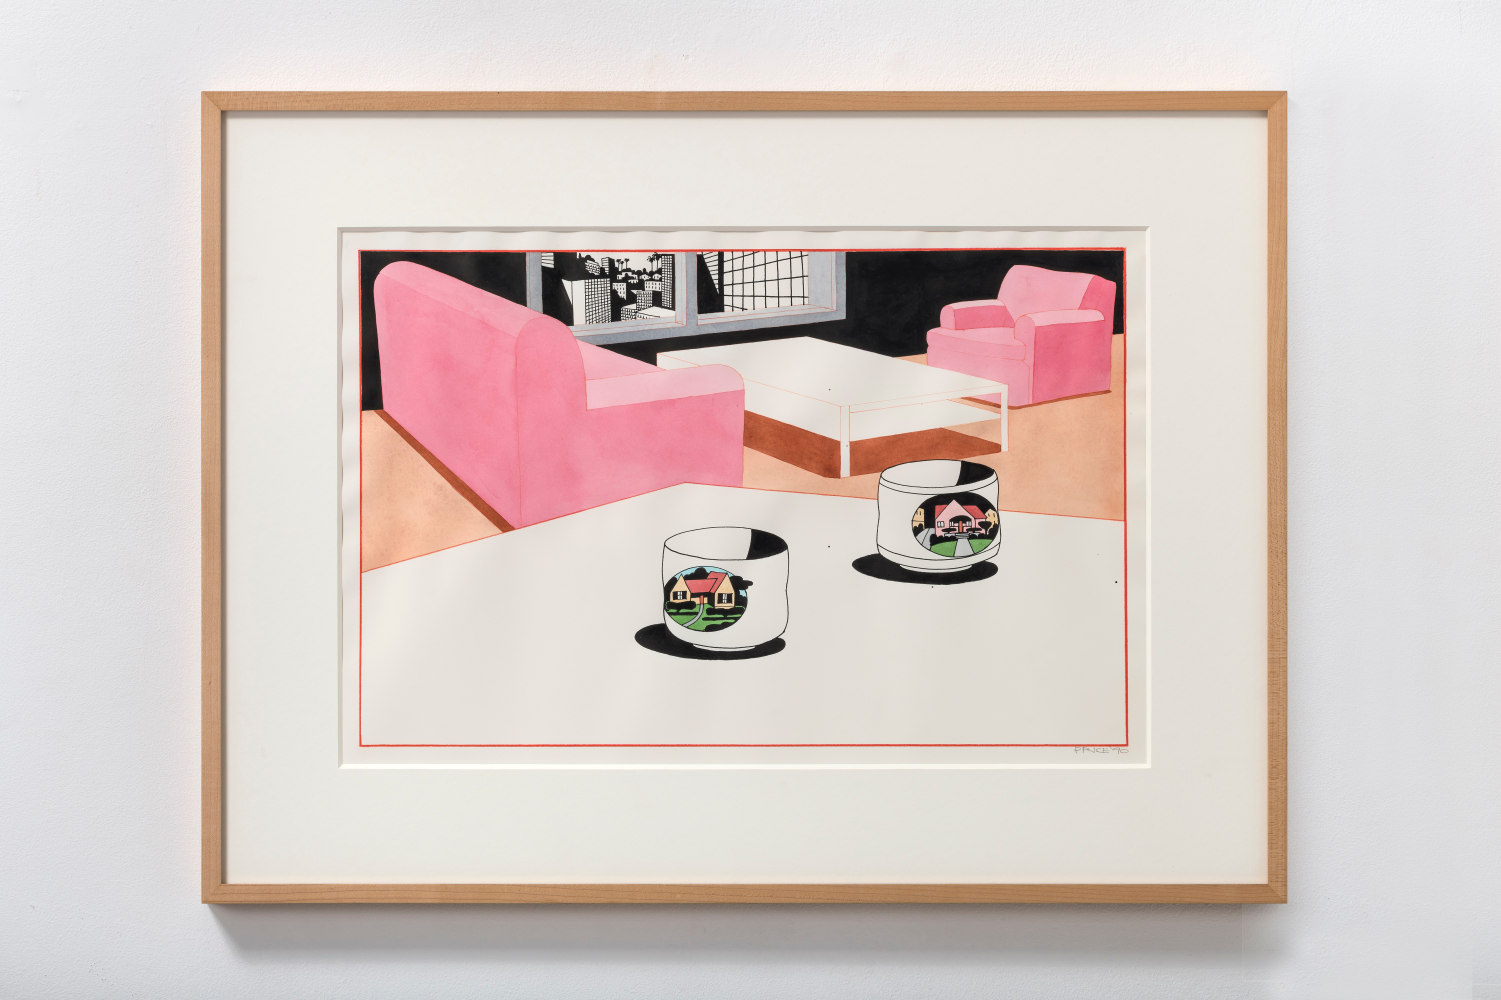 Untitled (Interior with 2 cups with house), 1990     watercolor, ink, and pencil on paper 15 5/8 x 23 3/4 inches;  39.7 x 60.3 centimeters LSFA# 15508